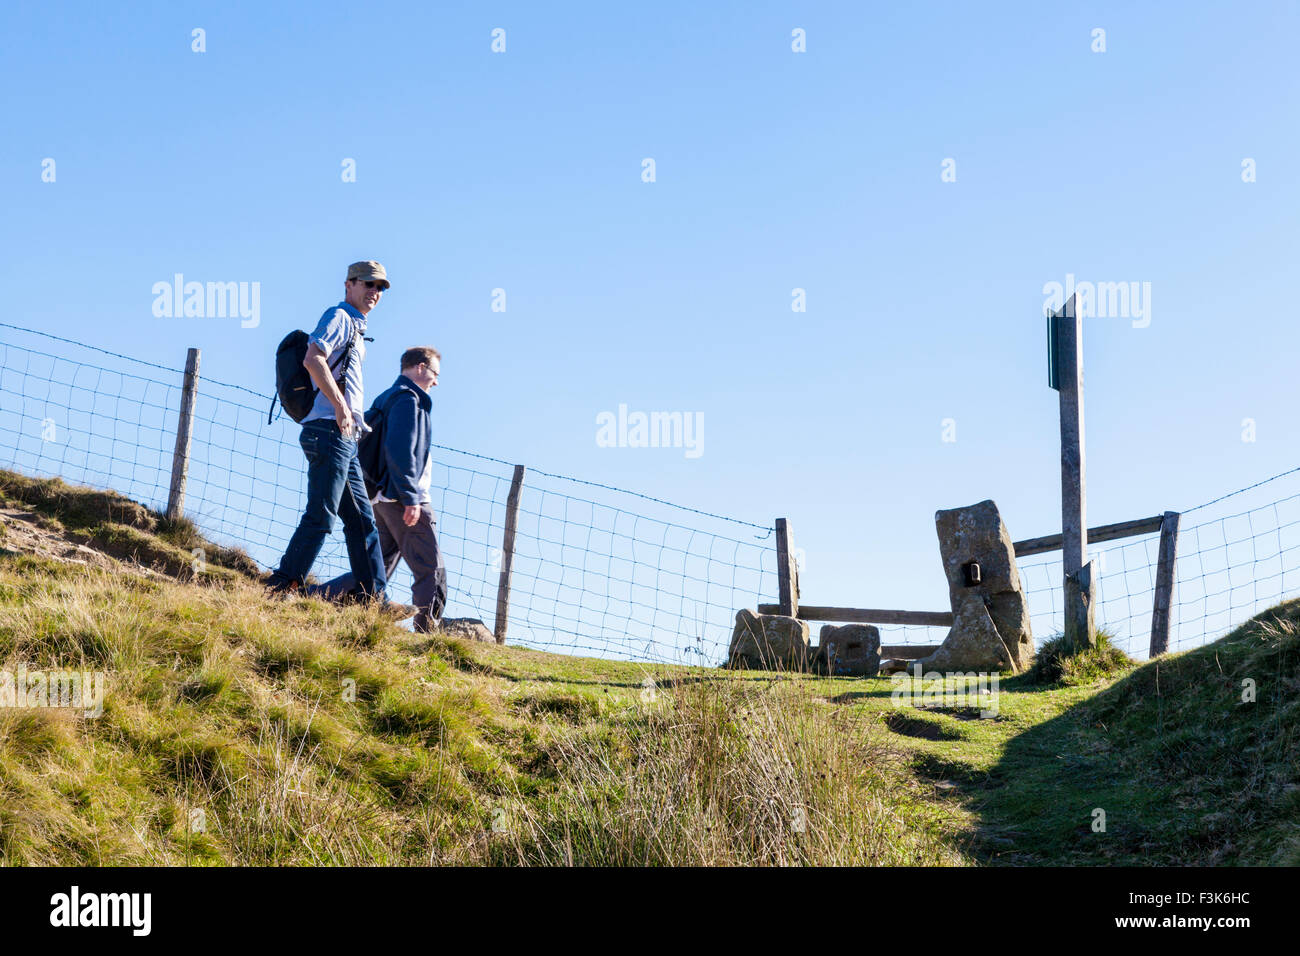 Rambling in the English countryside. Ramblers walking down a hill towards a stile on The Great Ridge, Derbyshire, Peak District, England, UK Stock Photo